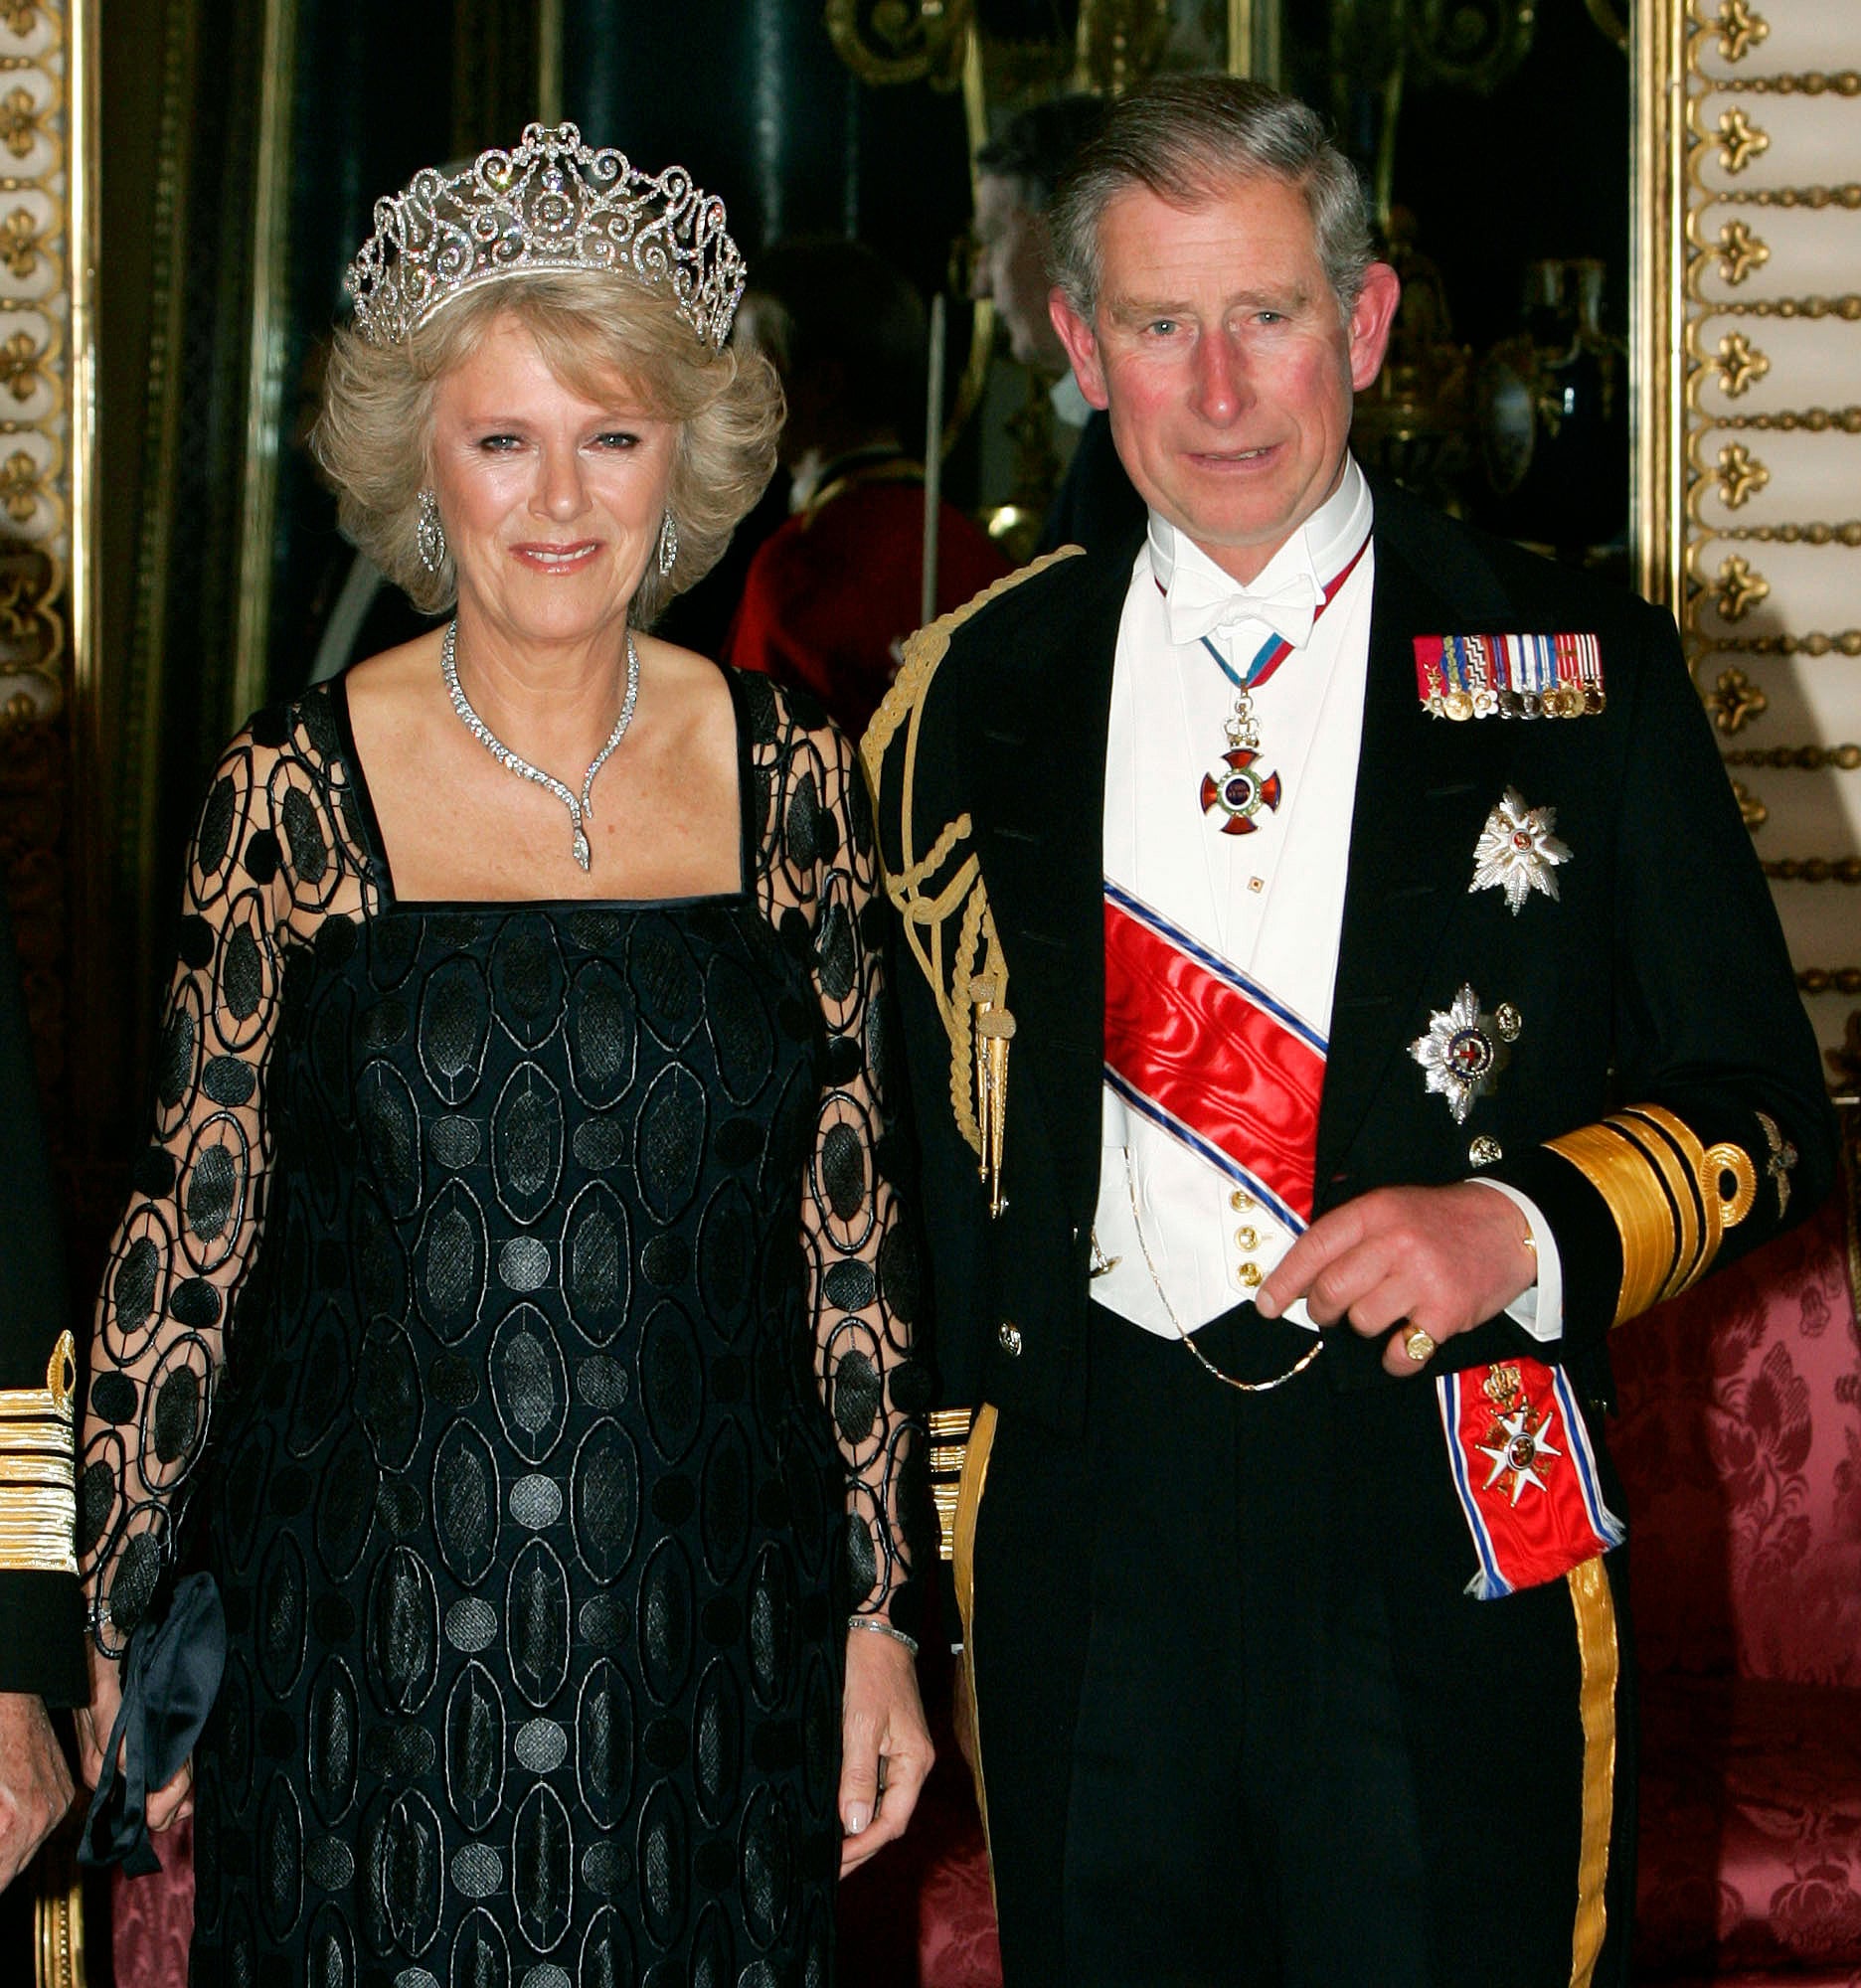 Camilla, Duchess of Cornwall in Royal heirloom diamond tiara, necklace and earrings and Prince Charles, the Prince of Wales attend a banquet in Buckingham Palace.  (Photo by © Pool Photograph/Corbis/Corbis via Getty Images)